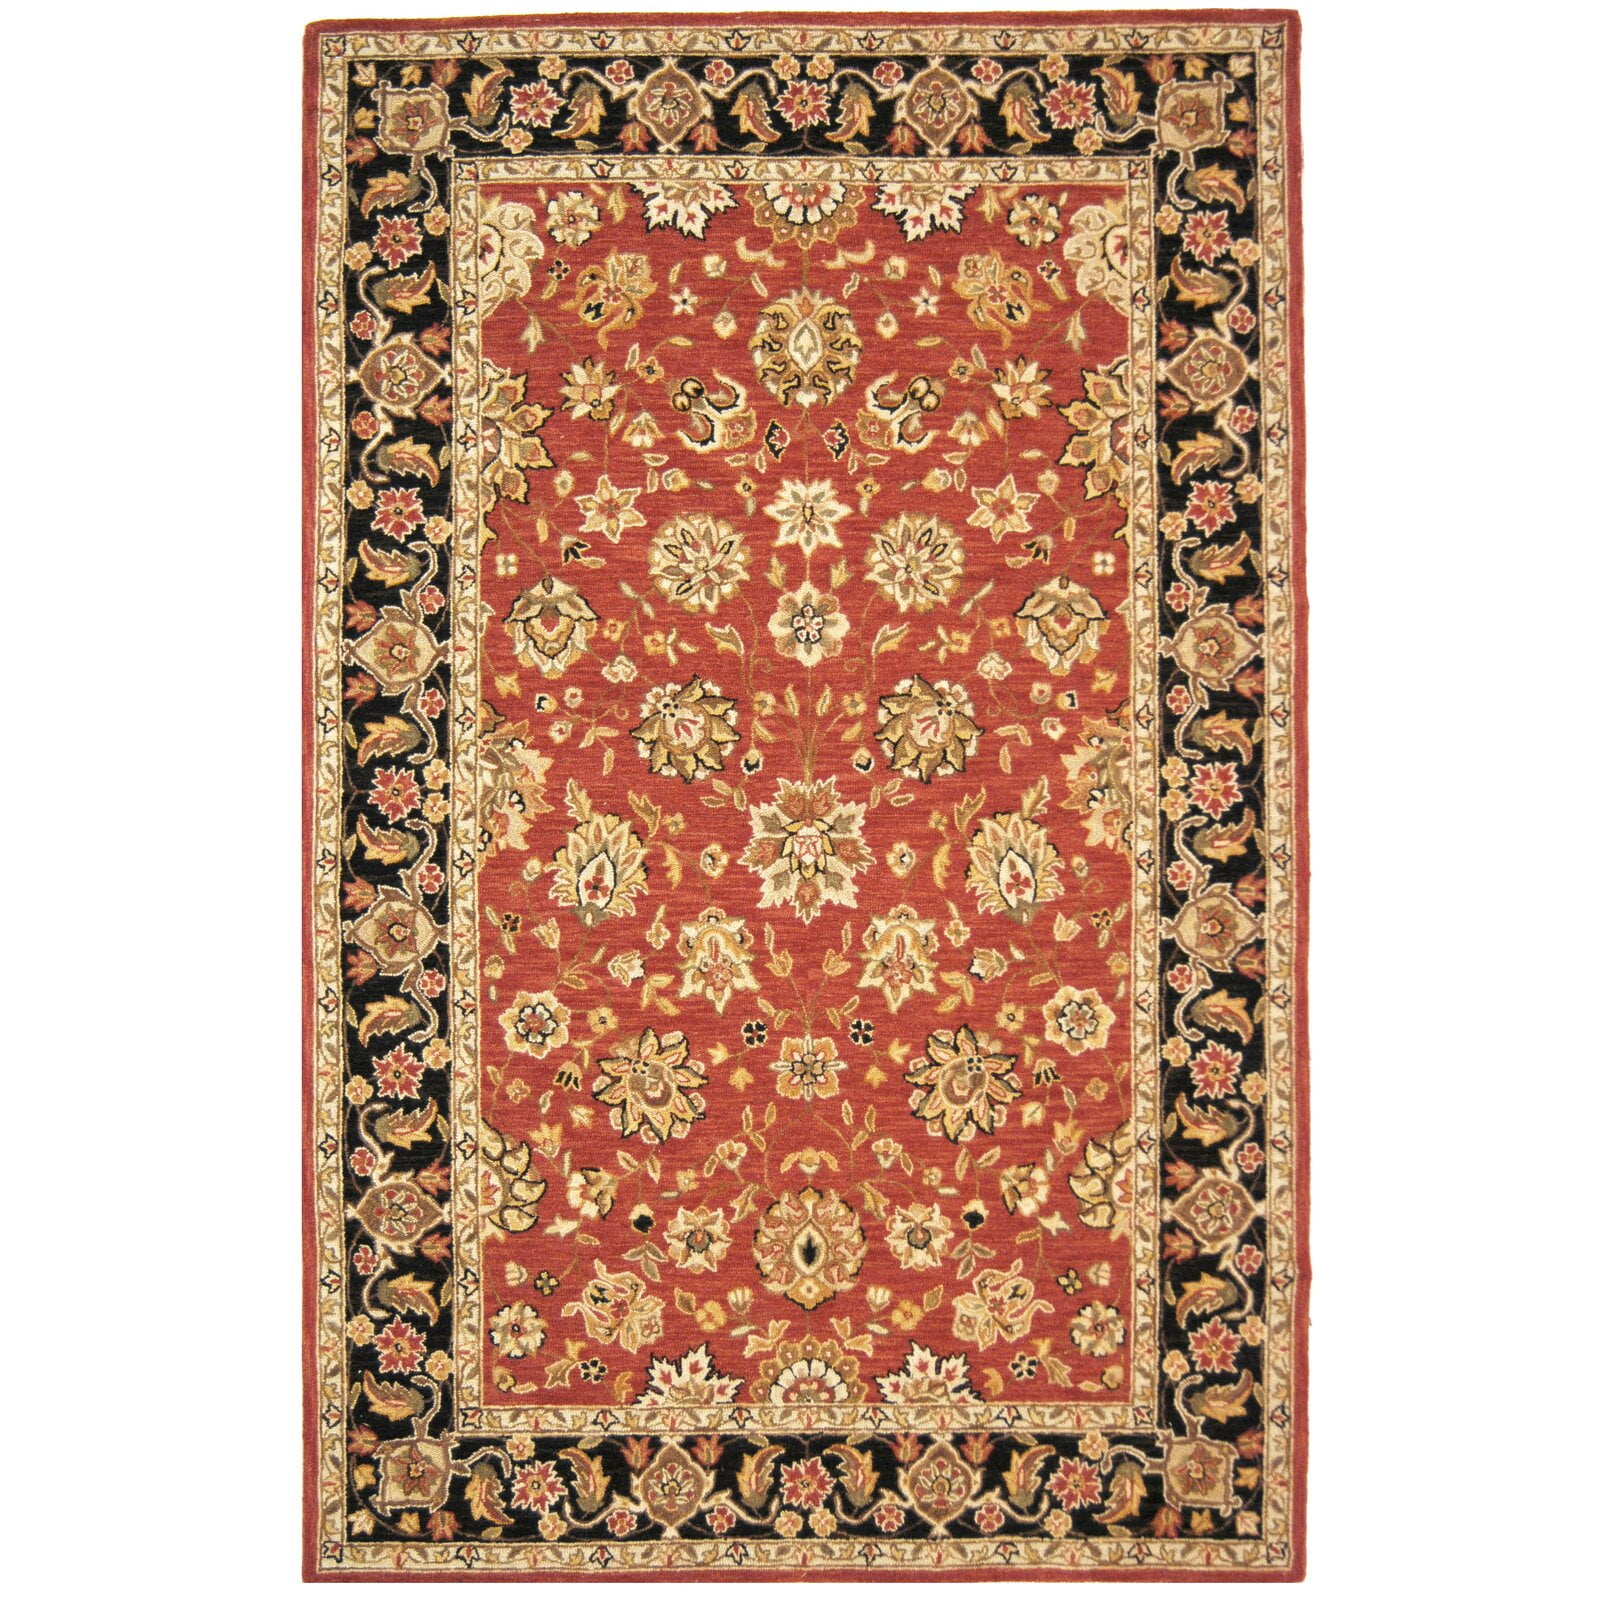 PREMIUM WOOL HAND TUFTED RUGS 8'x5' LARGE RED TRADITIONAL CHINESE AUBUSSON RUG